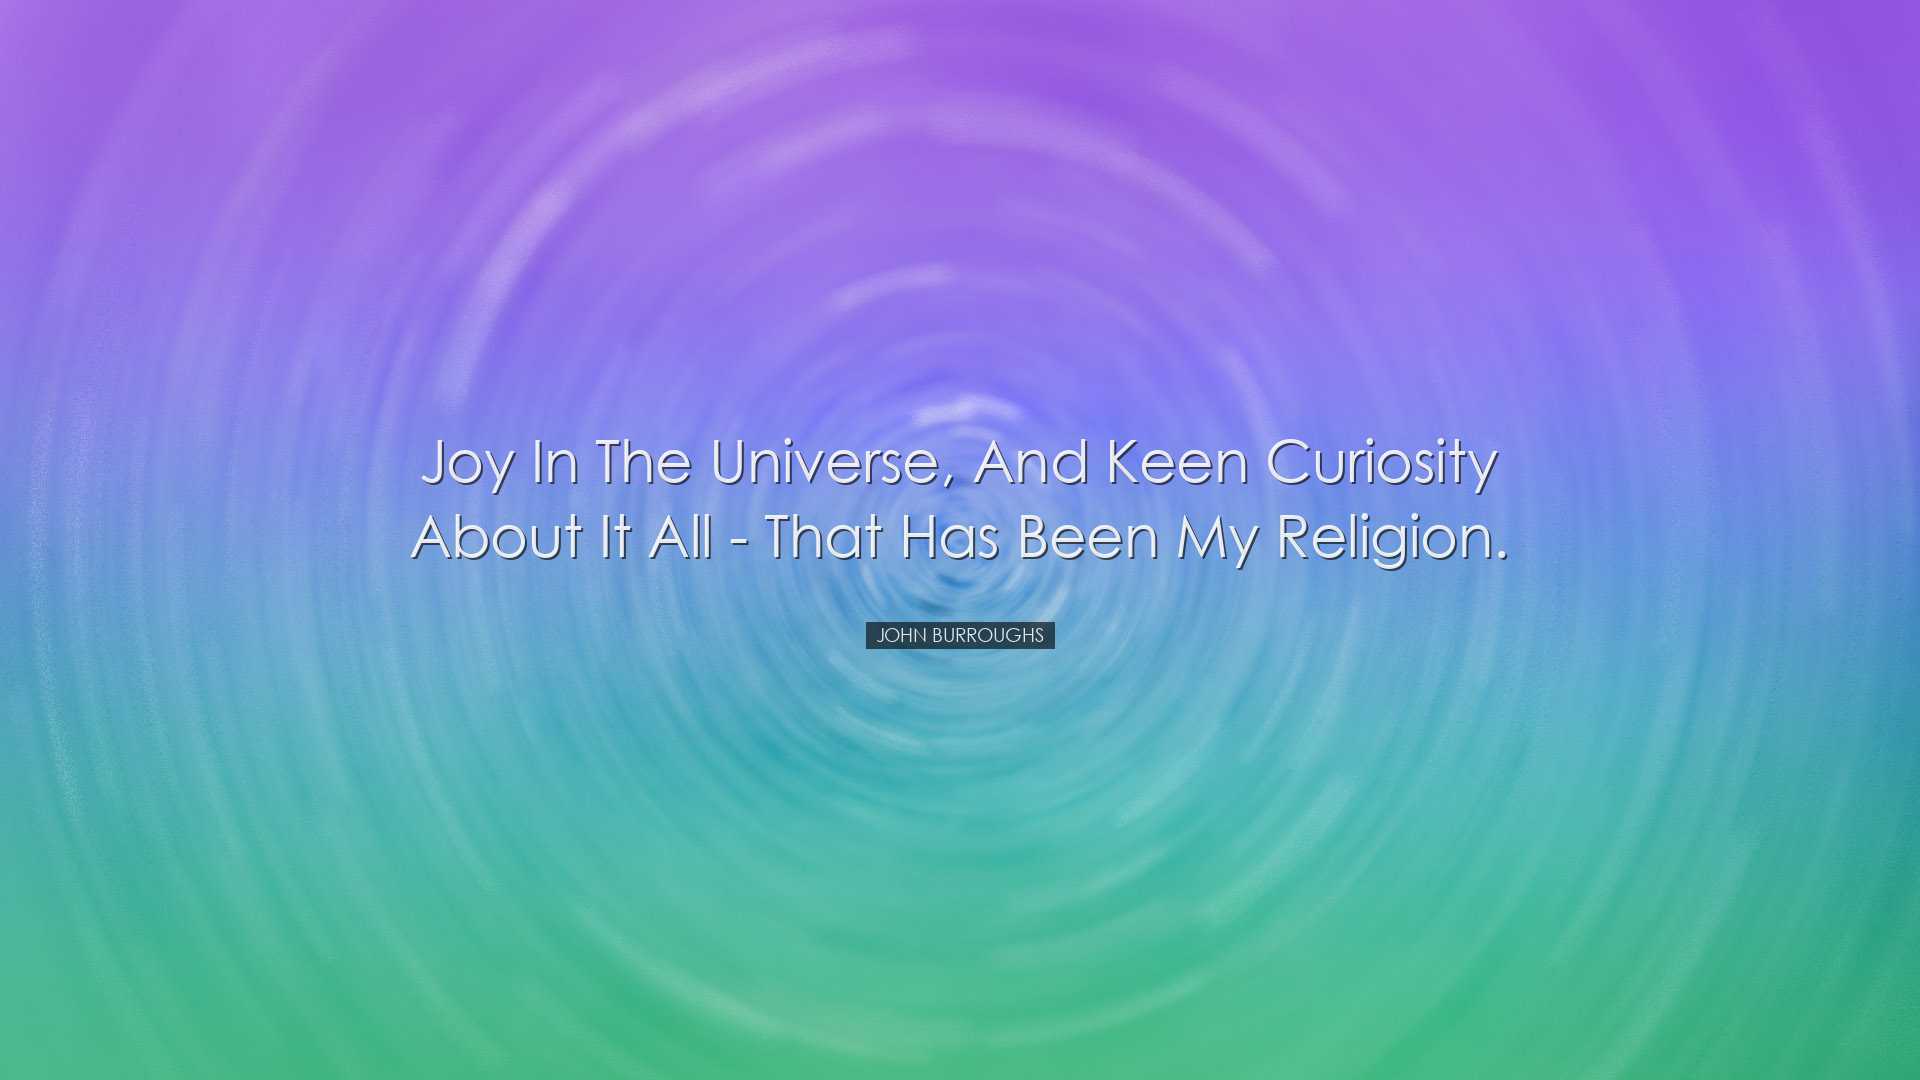 Joy in the universe, and keen curiosity about it all - that has be